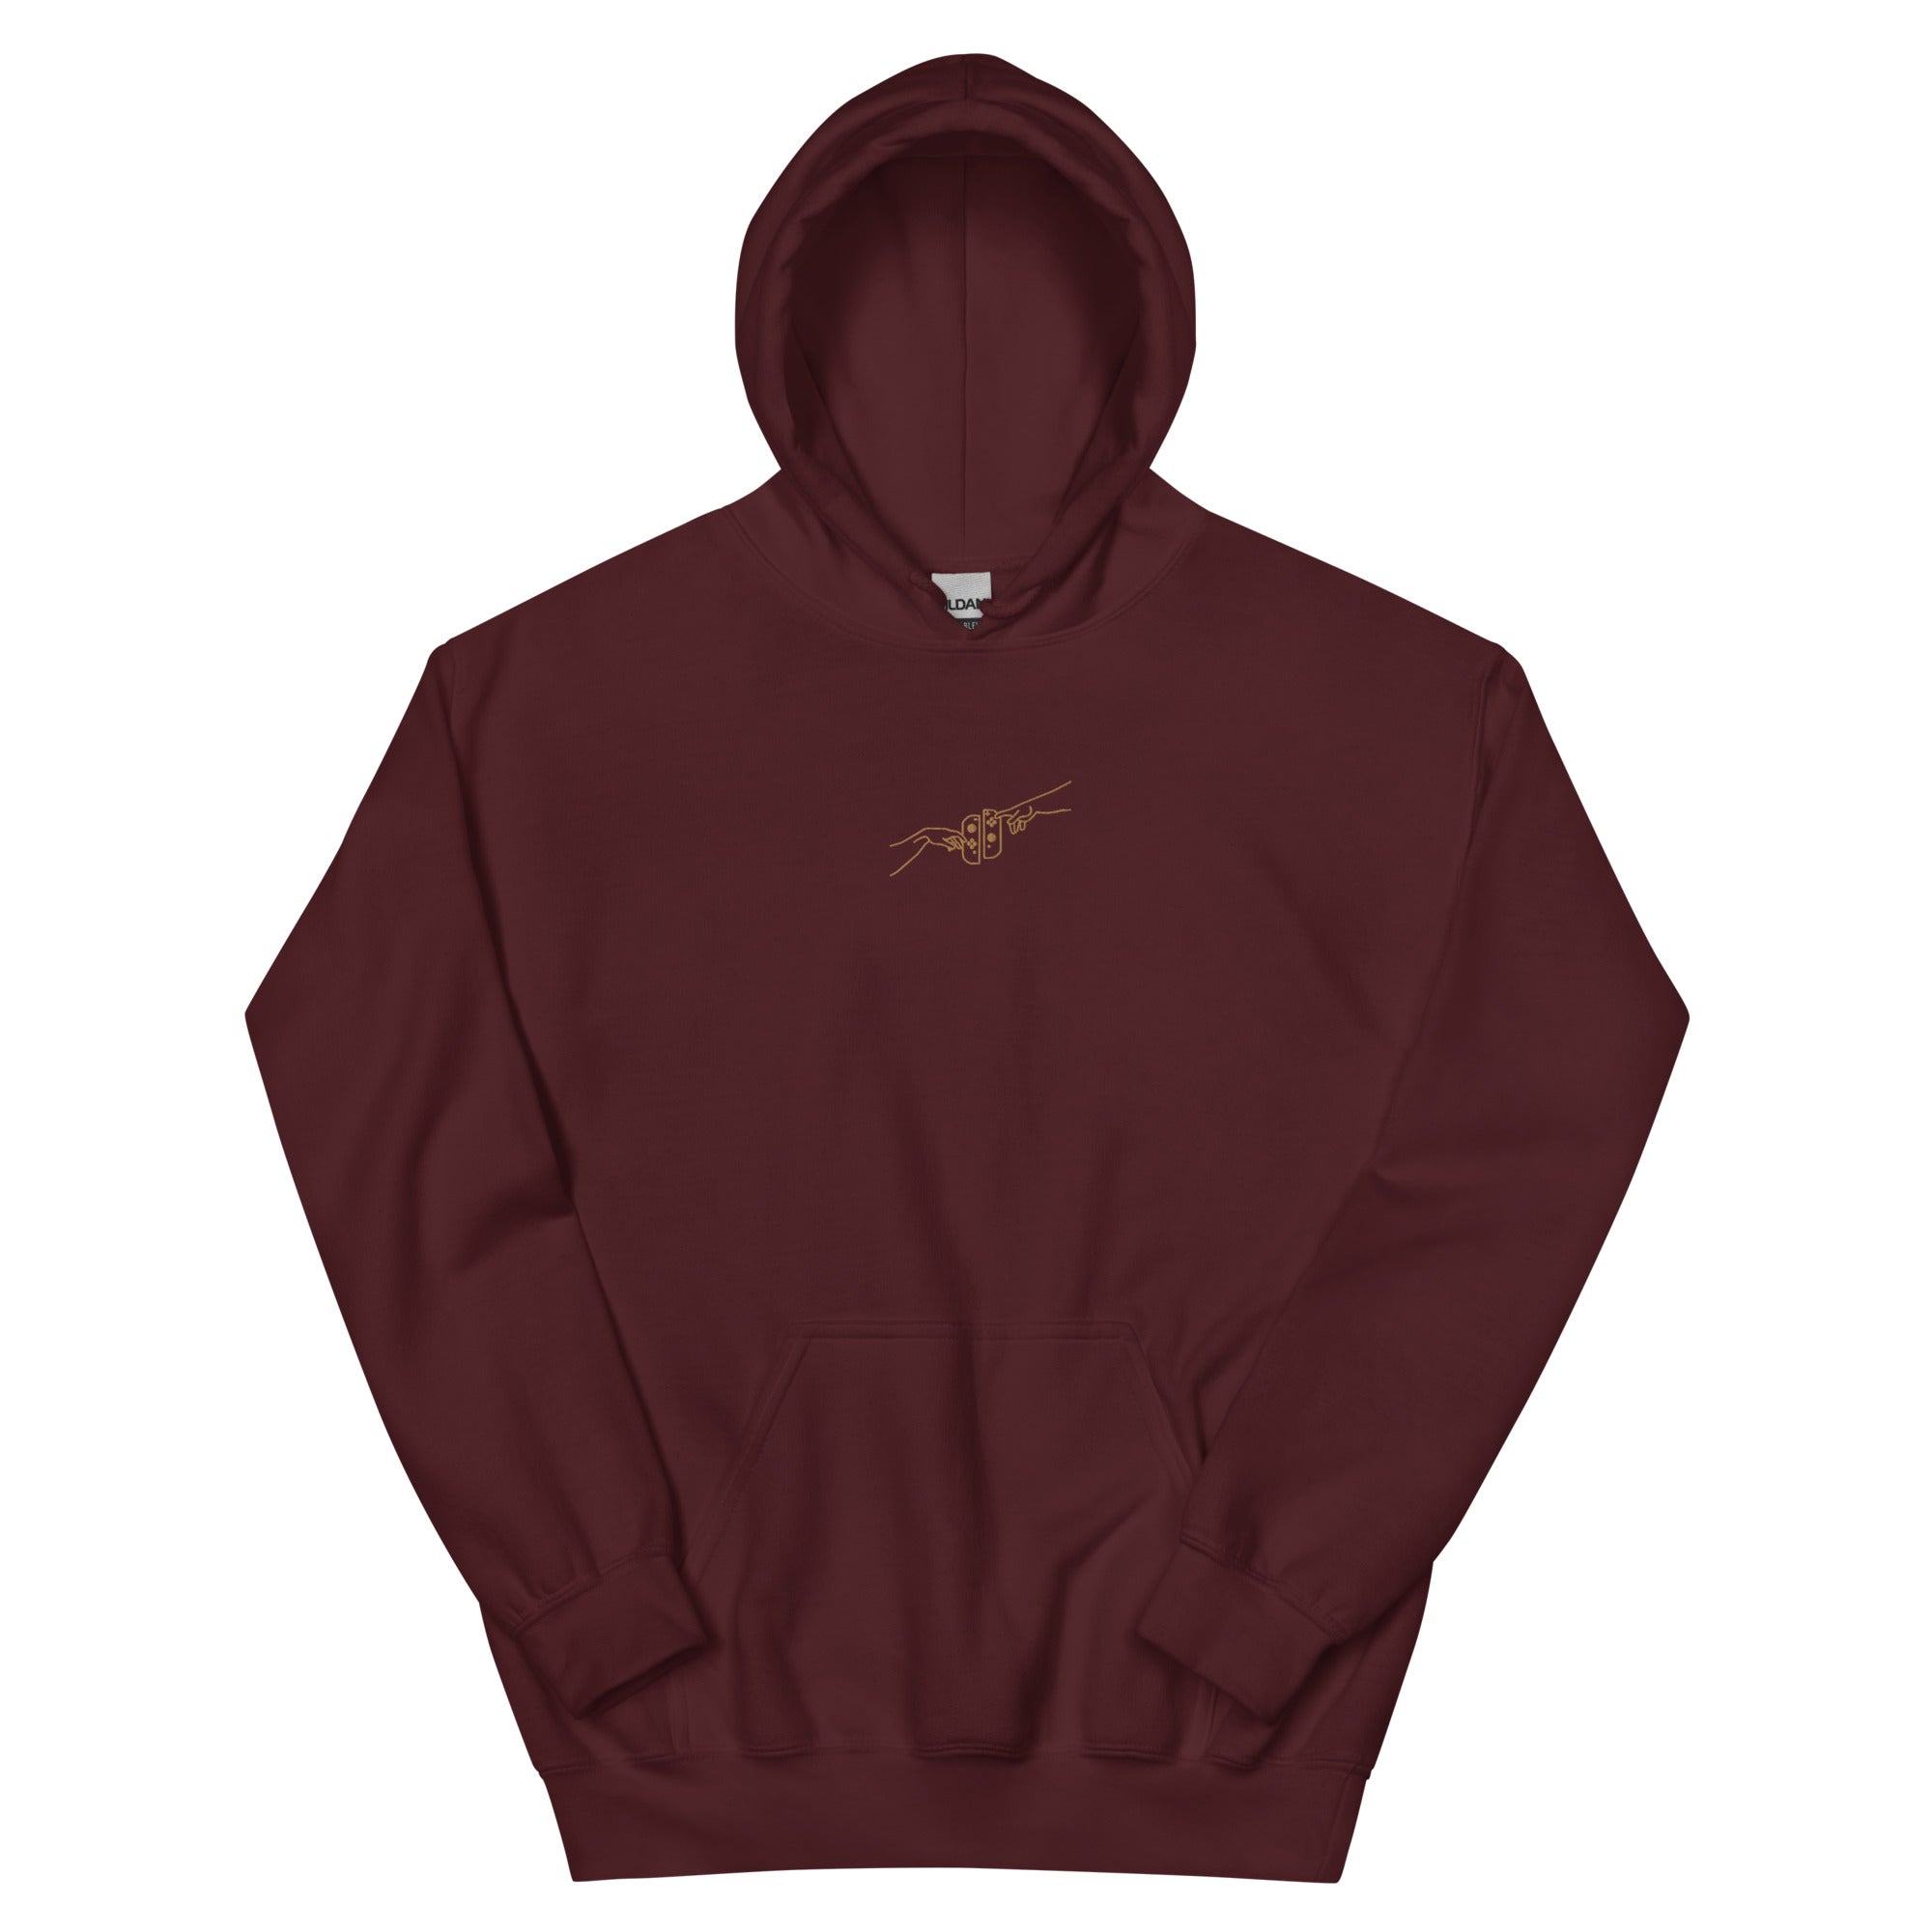 The Creation of Switch | Embroidered Unisex Hoodie | Cozy Gamer Threads and Thistles Inventory Maroon S 